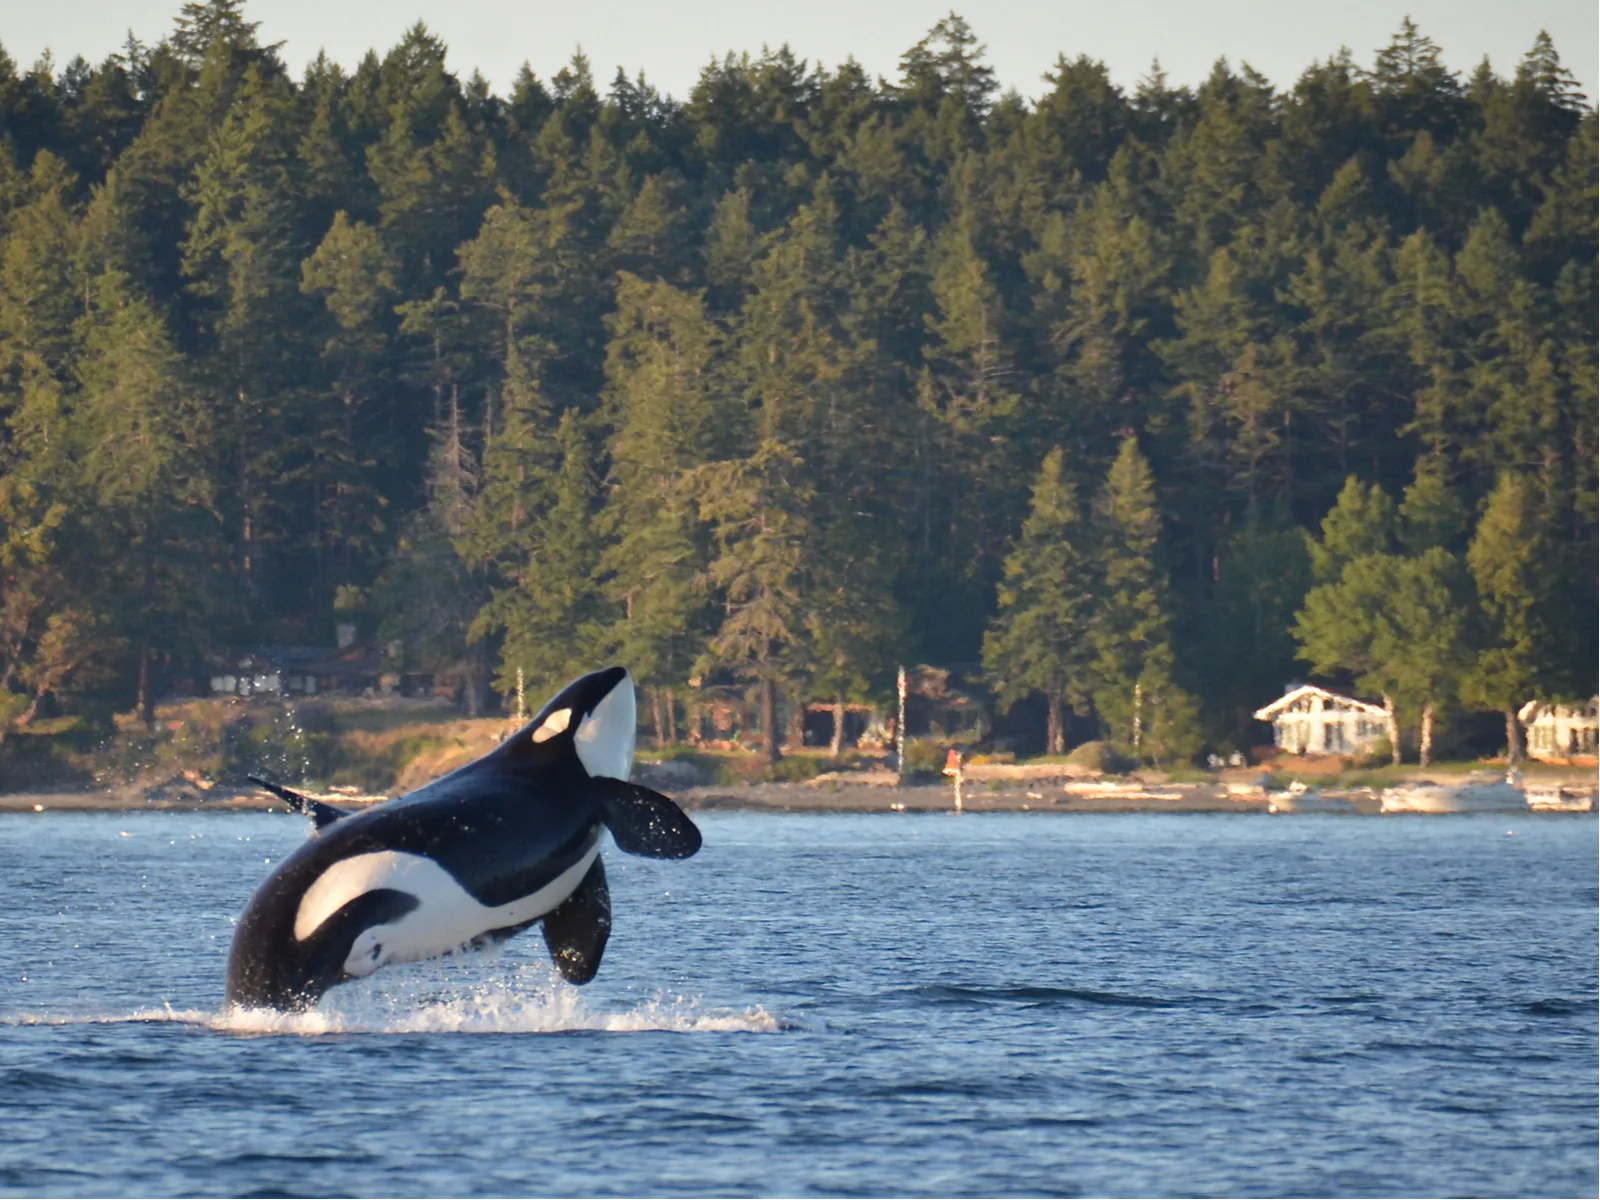 Killer whale jumping out of the water near the San Juan Islands, one of the best places to visit in Washington State